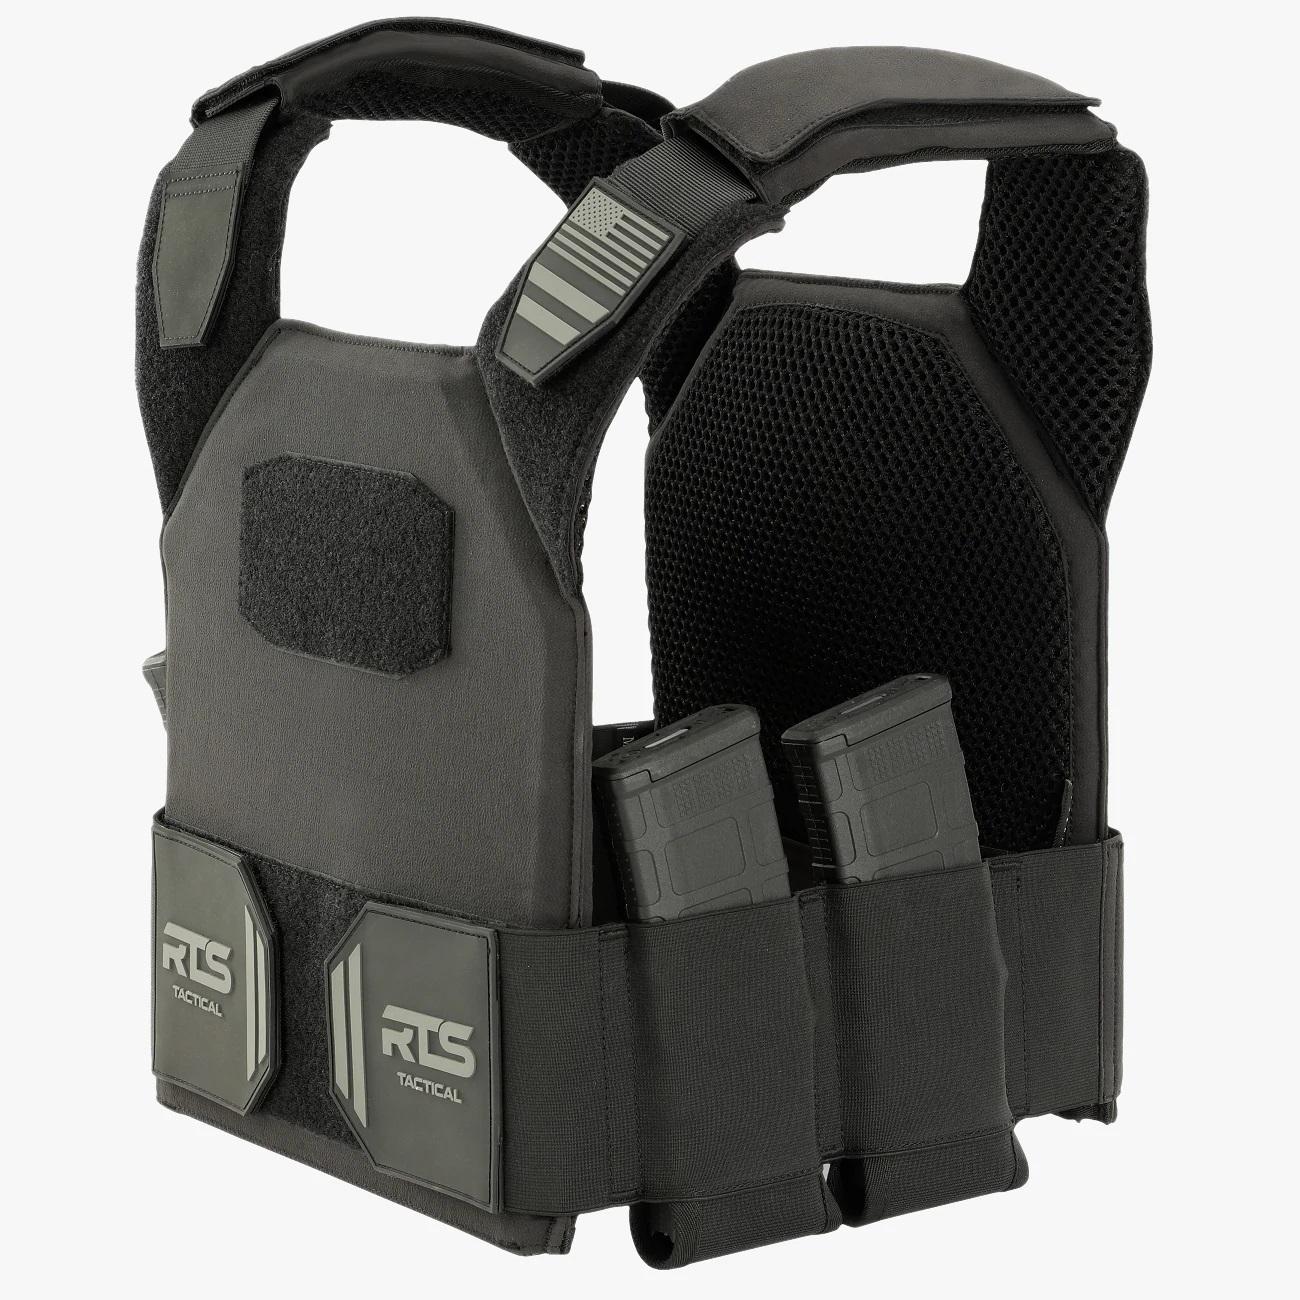 RTS TACTICAL ADVANCED SLEEK 2.0 PLATE CARRIER - $129.99 (Free Shipping)